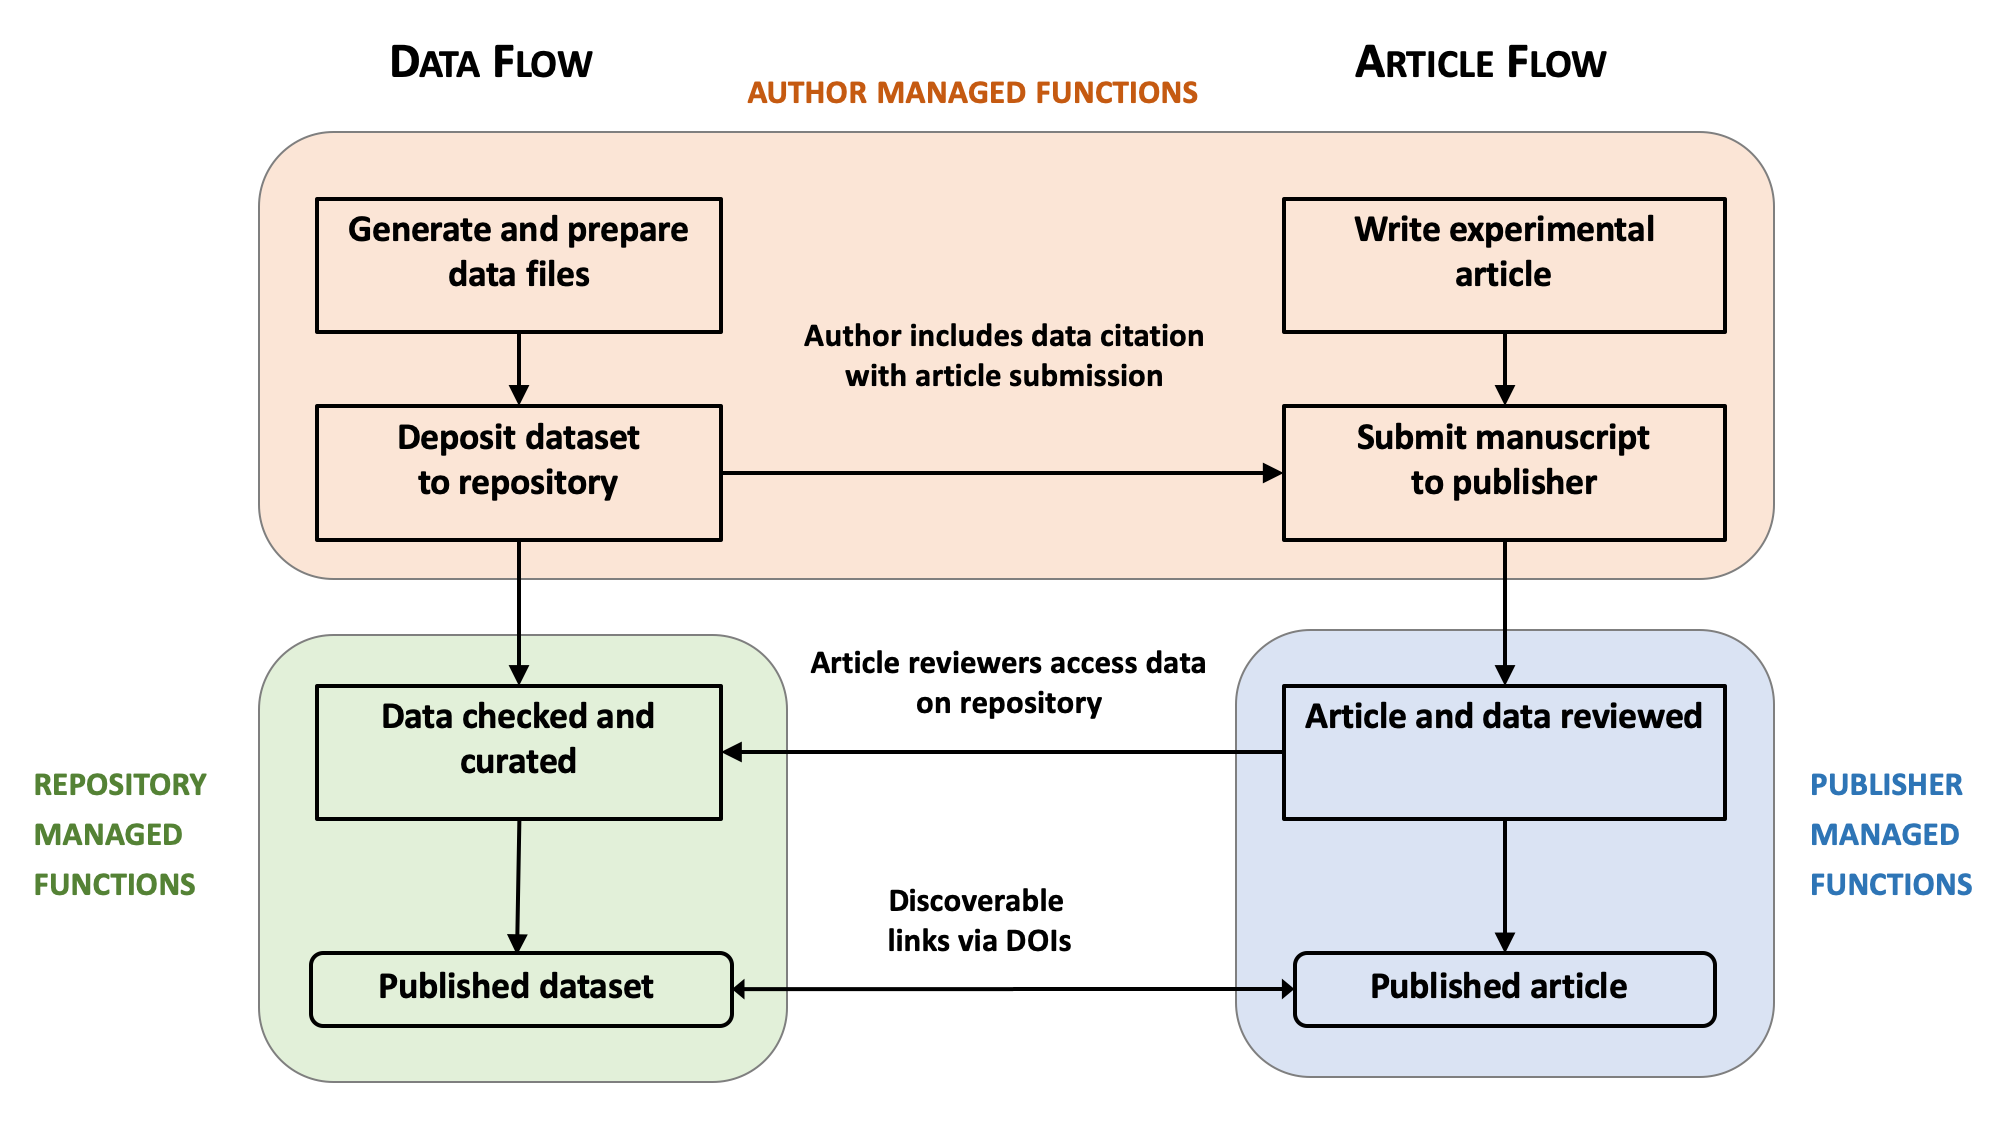 The data workflow starts with generating and preparing data files, which happens in parallel with the article workflow in which the experimental article gets written.  In the next step of author-managed functions the data set gets deposited to the repository and the manuscript gets submitted to the publisher. For the latter, the author includes a citation to the deposited data set. The next step of the workflow is handled by the repository and the publisher, respectively. The data is checked and curated by the repository, while the article and data are examined by the reviewer. The latter has access to the data set in-curation. 
In the final step of the parallel workflows, the data set gets published and the article gets published, each with a DOI link referring to the other.